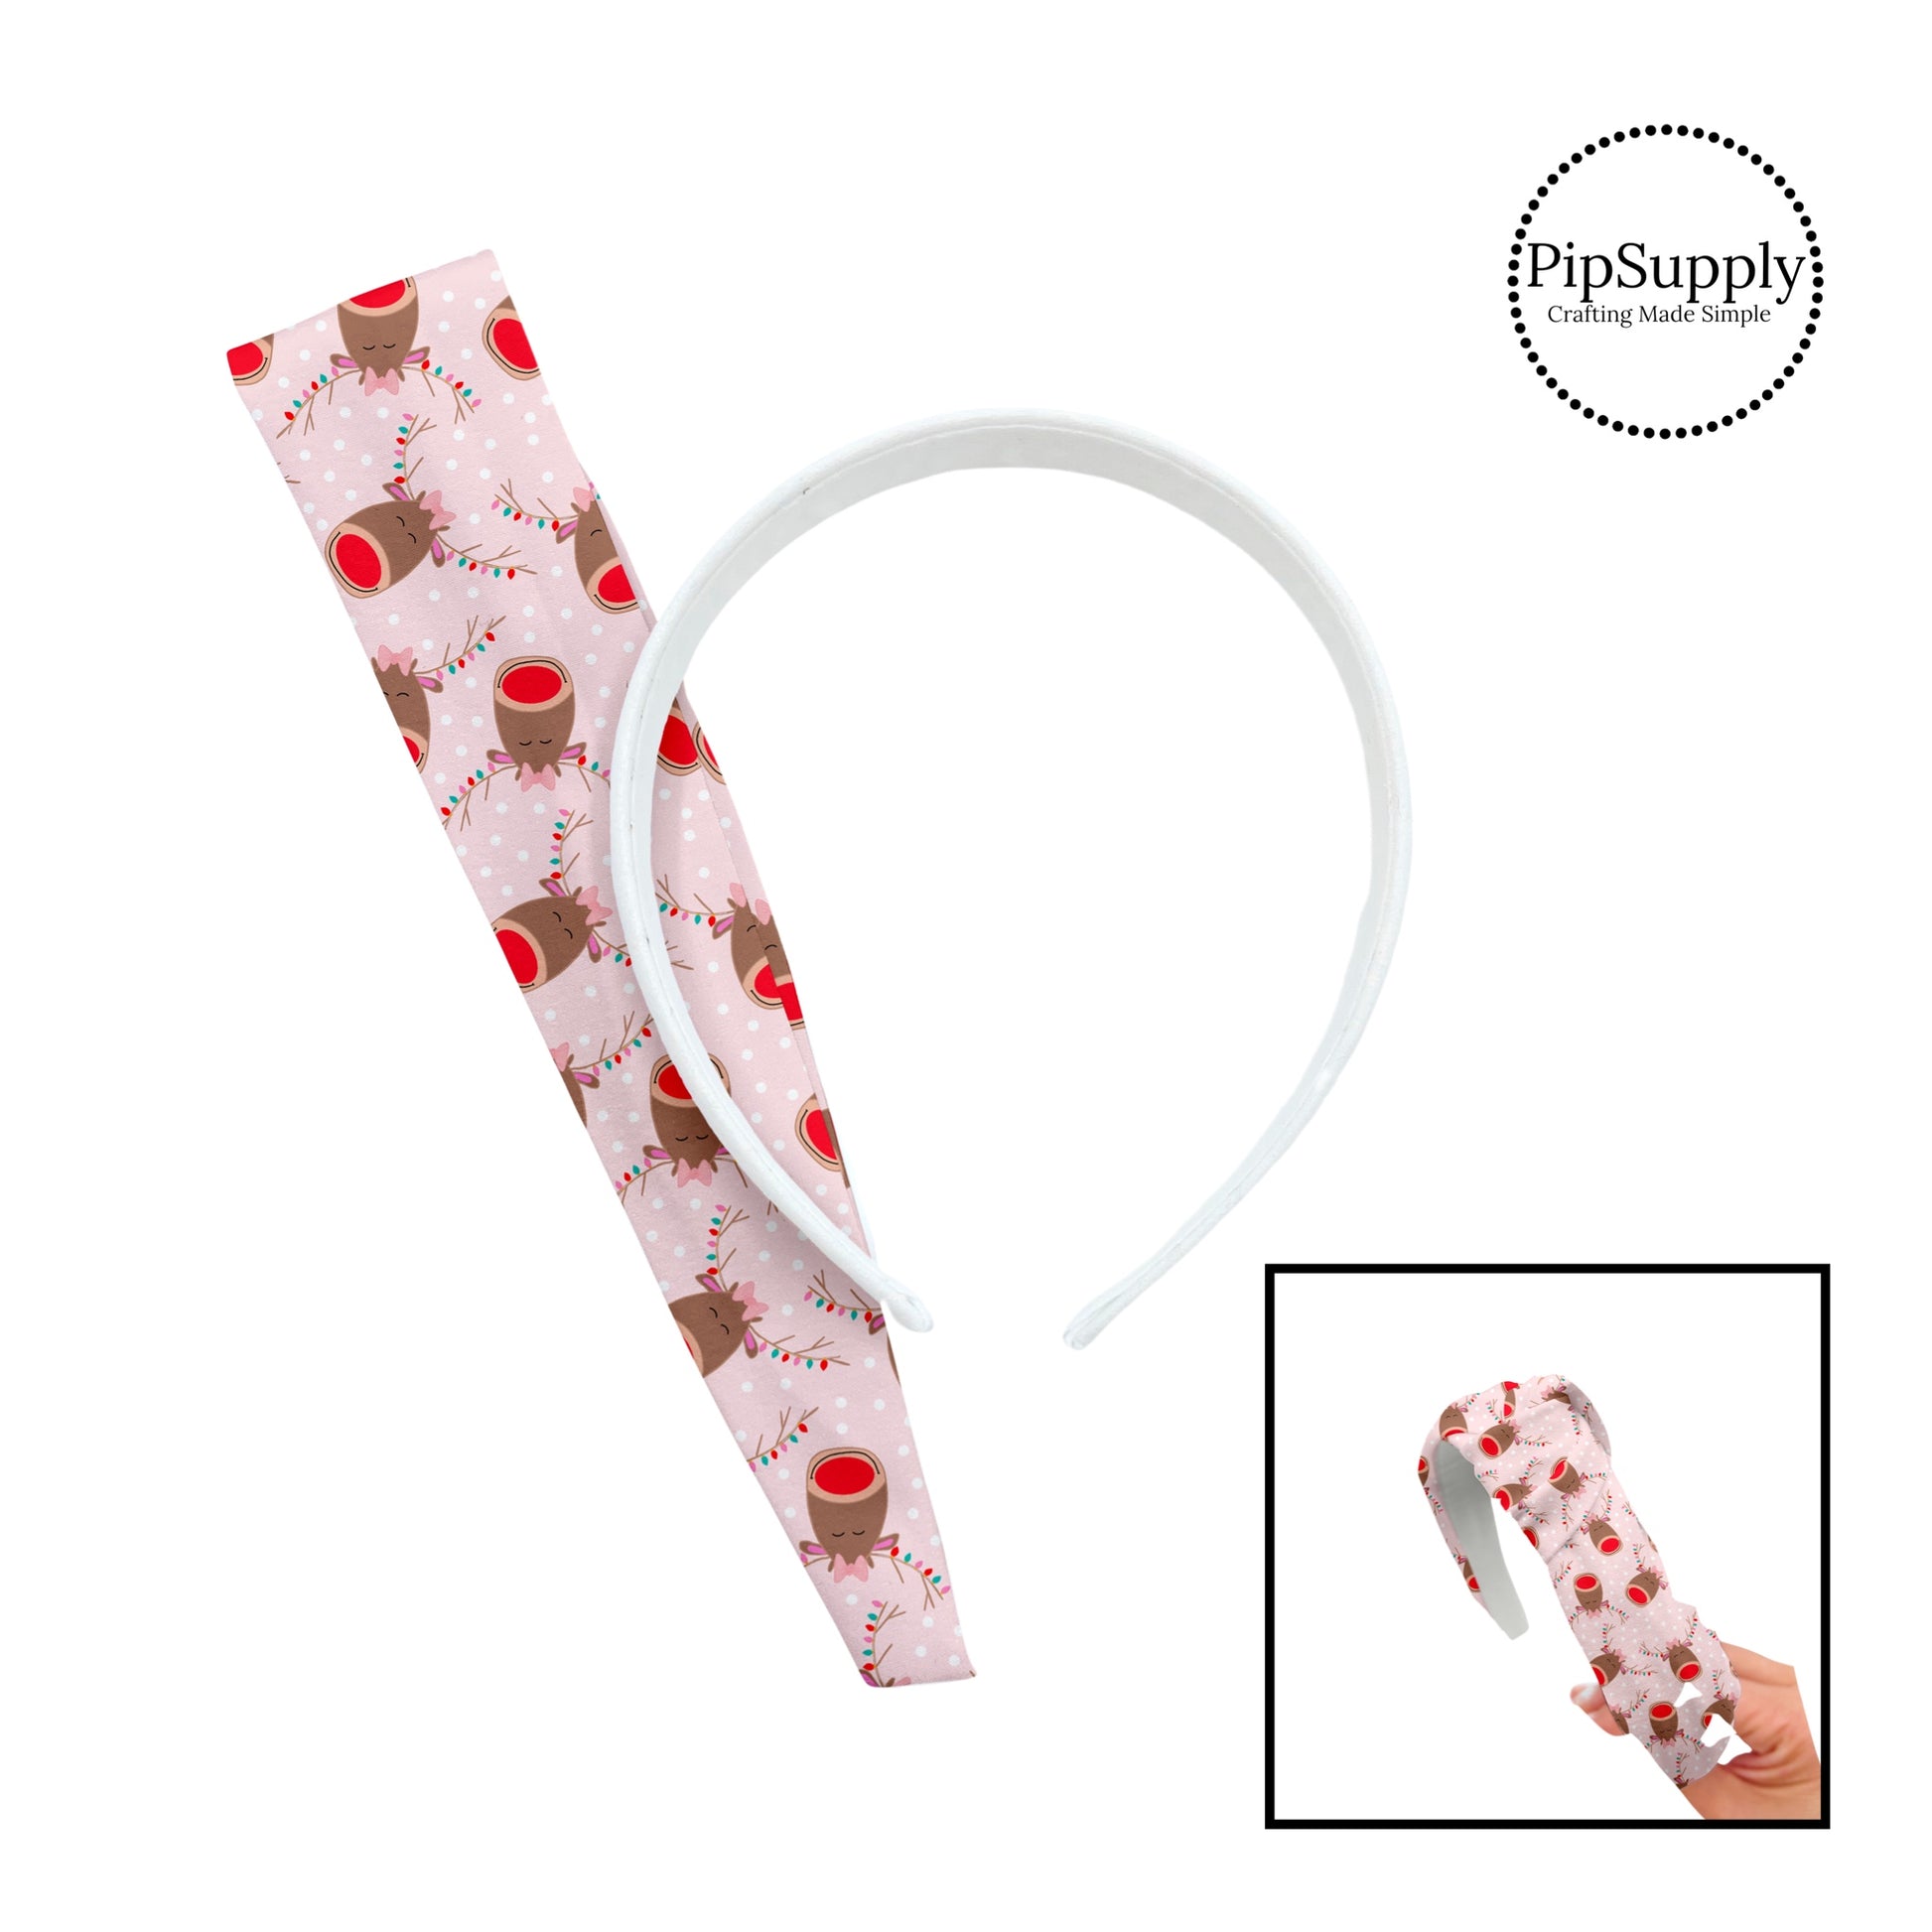 These holiday pattern themed headband kits are easy to assemble and come with everything you need to make your own knotted headband. These fun Christmas kits include a custom printed and sewn fabric strip and a coordinating velvet headband. The headband kits features reindeers with Christmas lights on light pink with small white dots. 